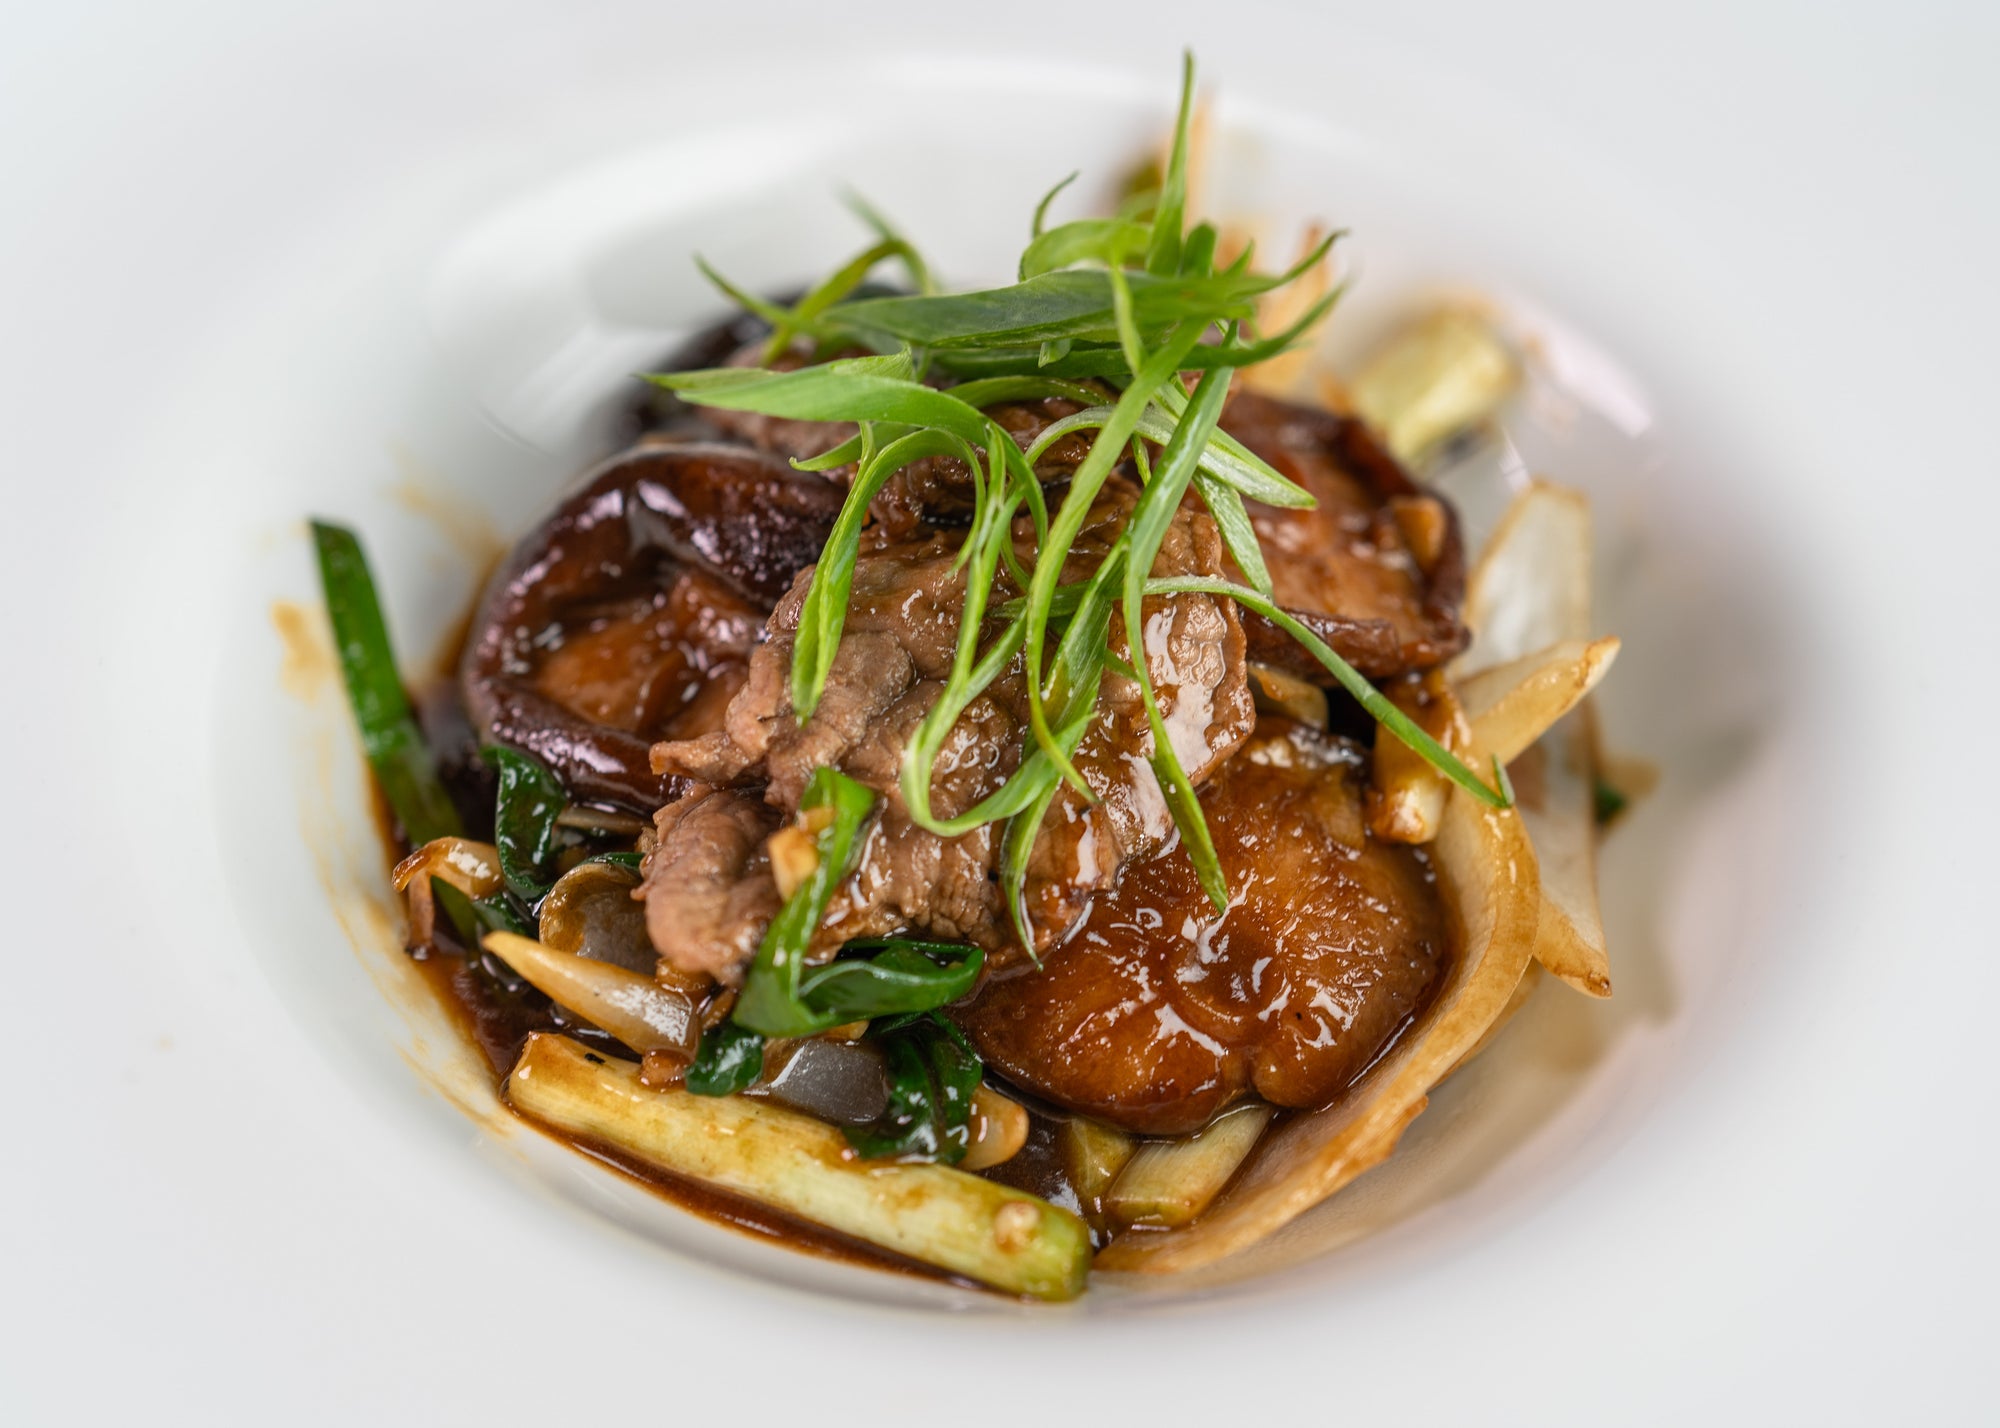 Stir fried Beef in Oyster Sauce